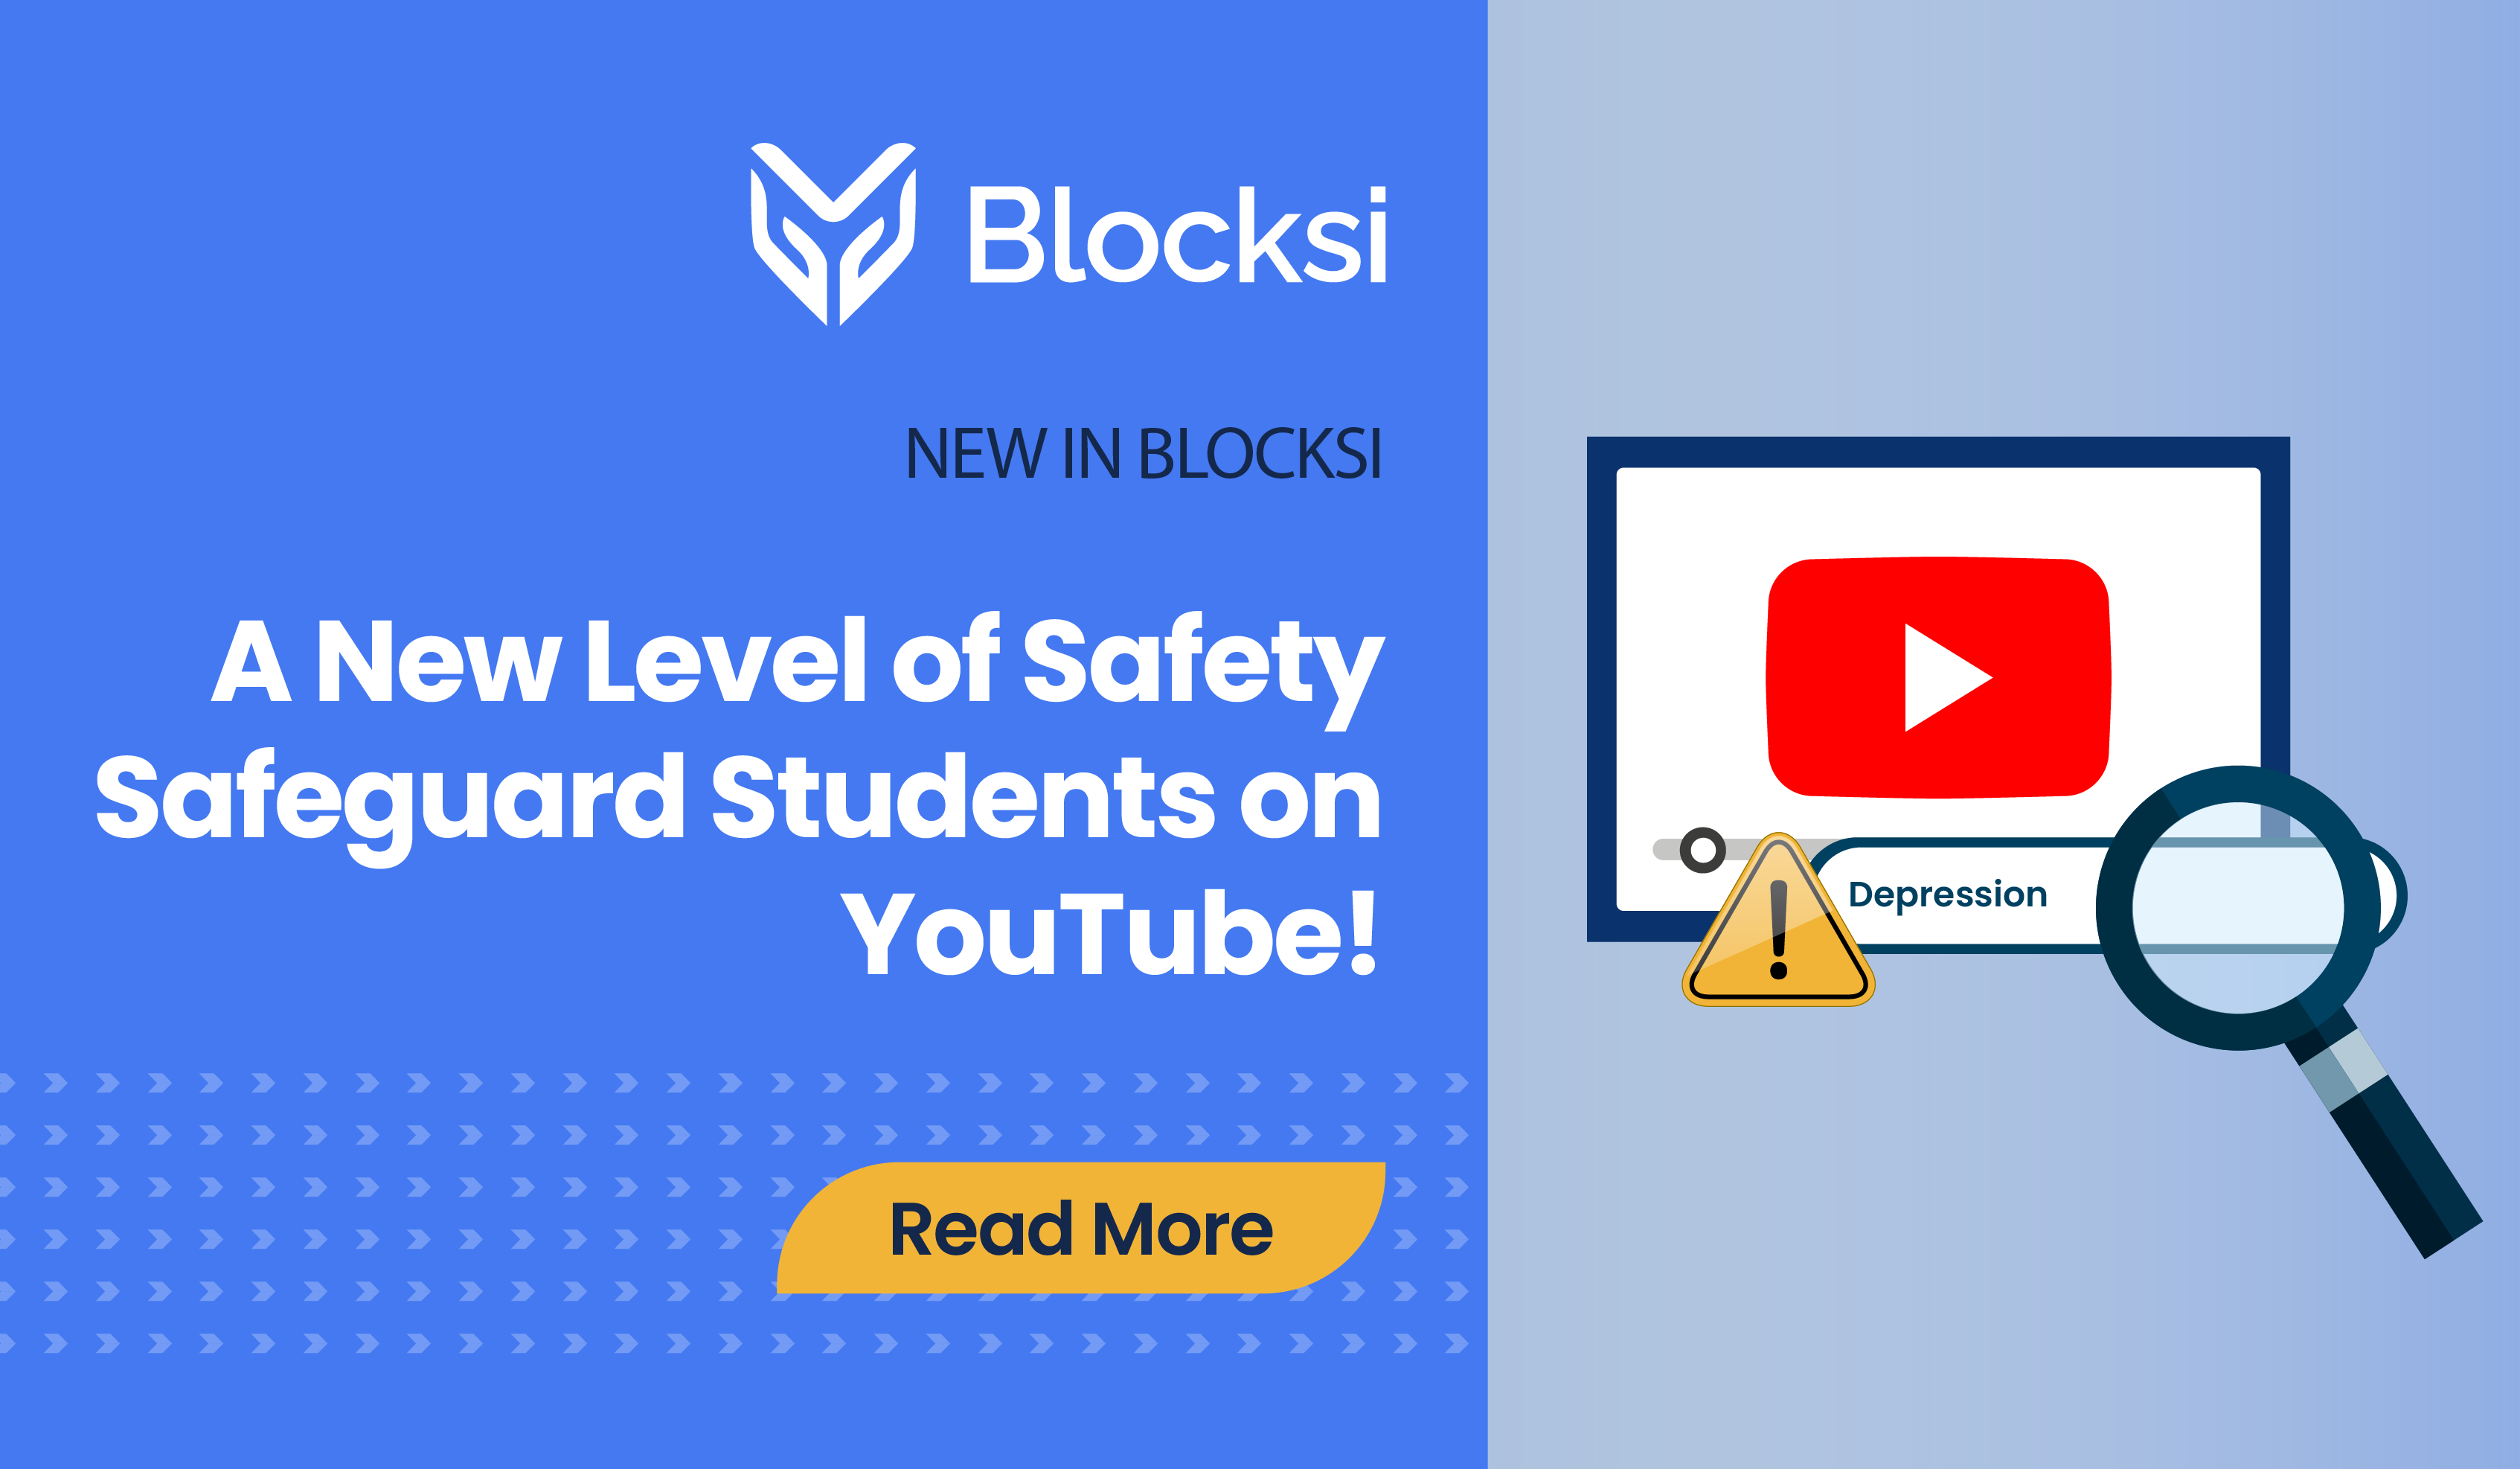 A New Level of Safety: Blocksi Safeguards Students on YouTube